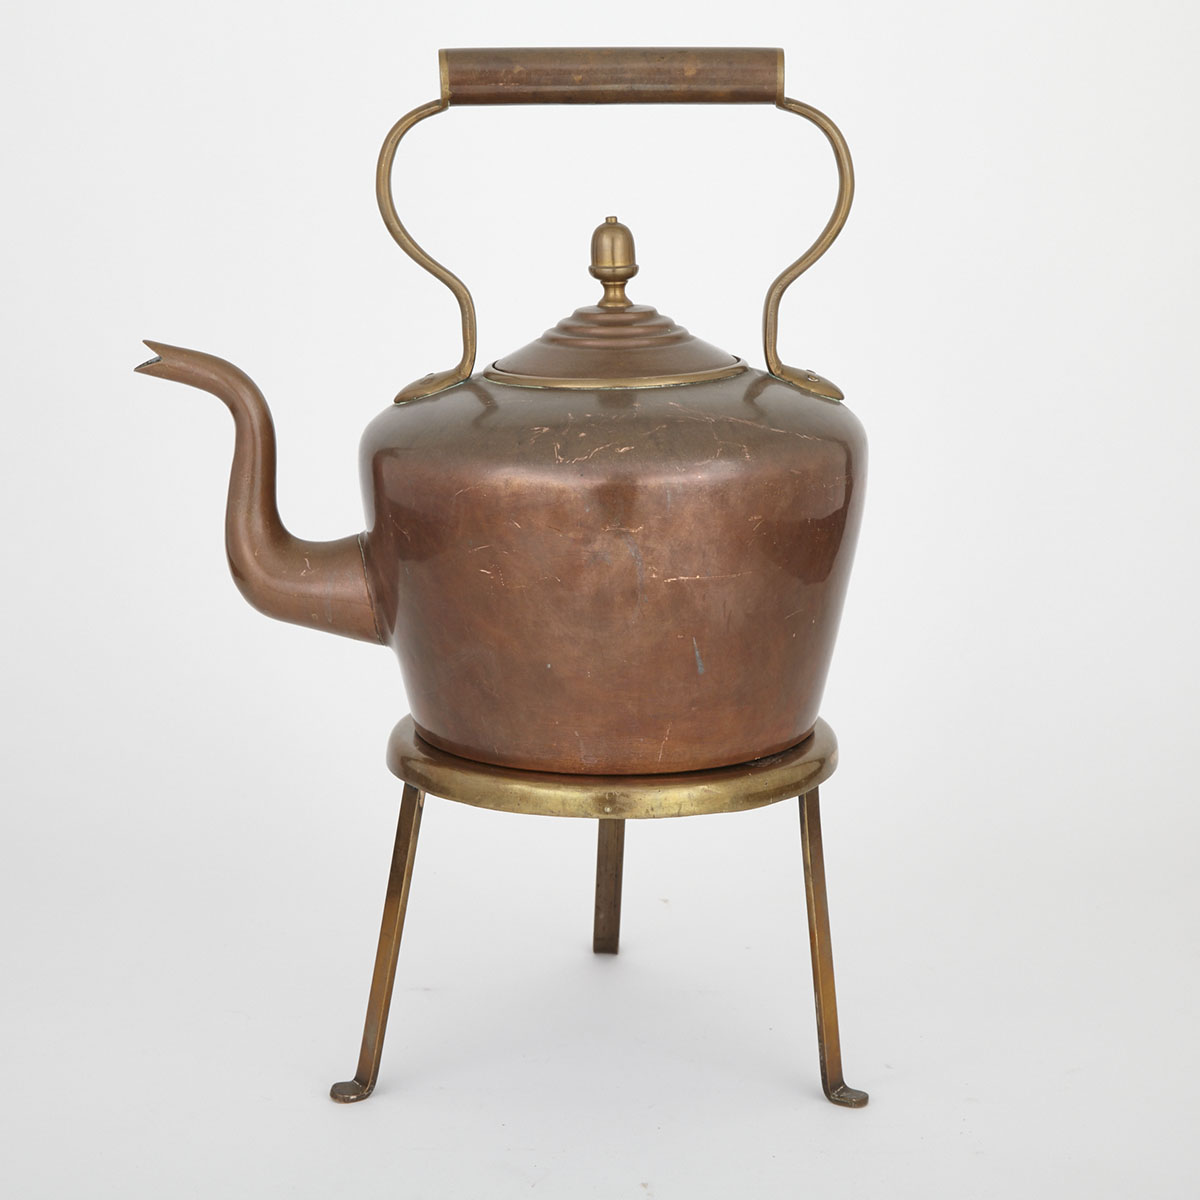 Large Brass Mounted Copper Kettle on Stand, 19th century